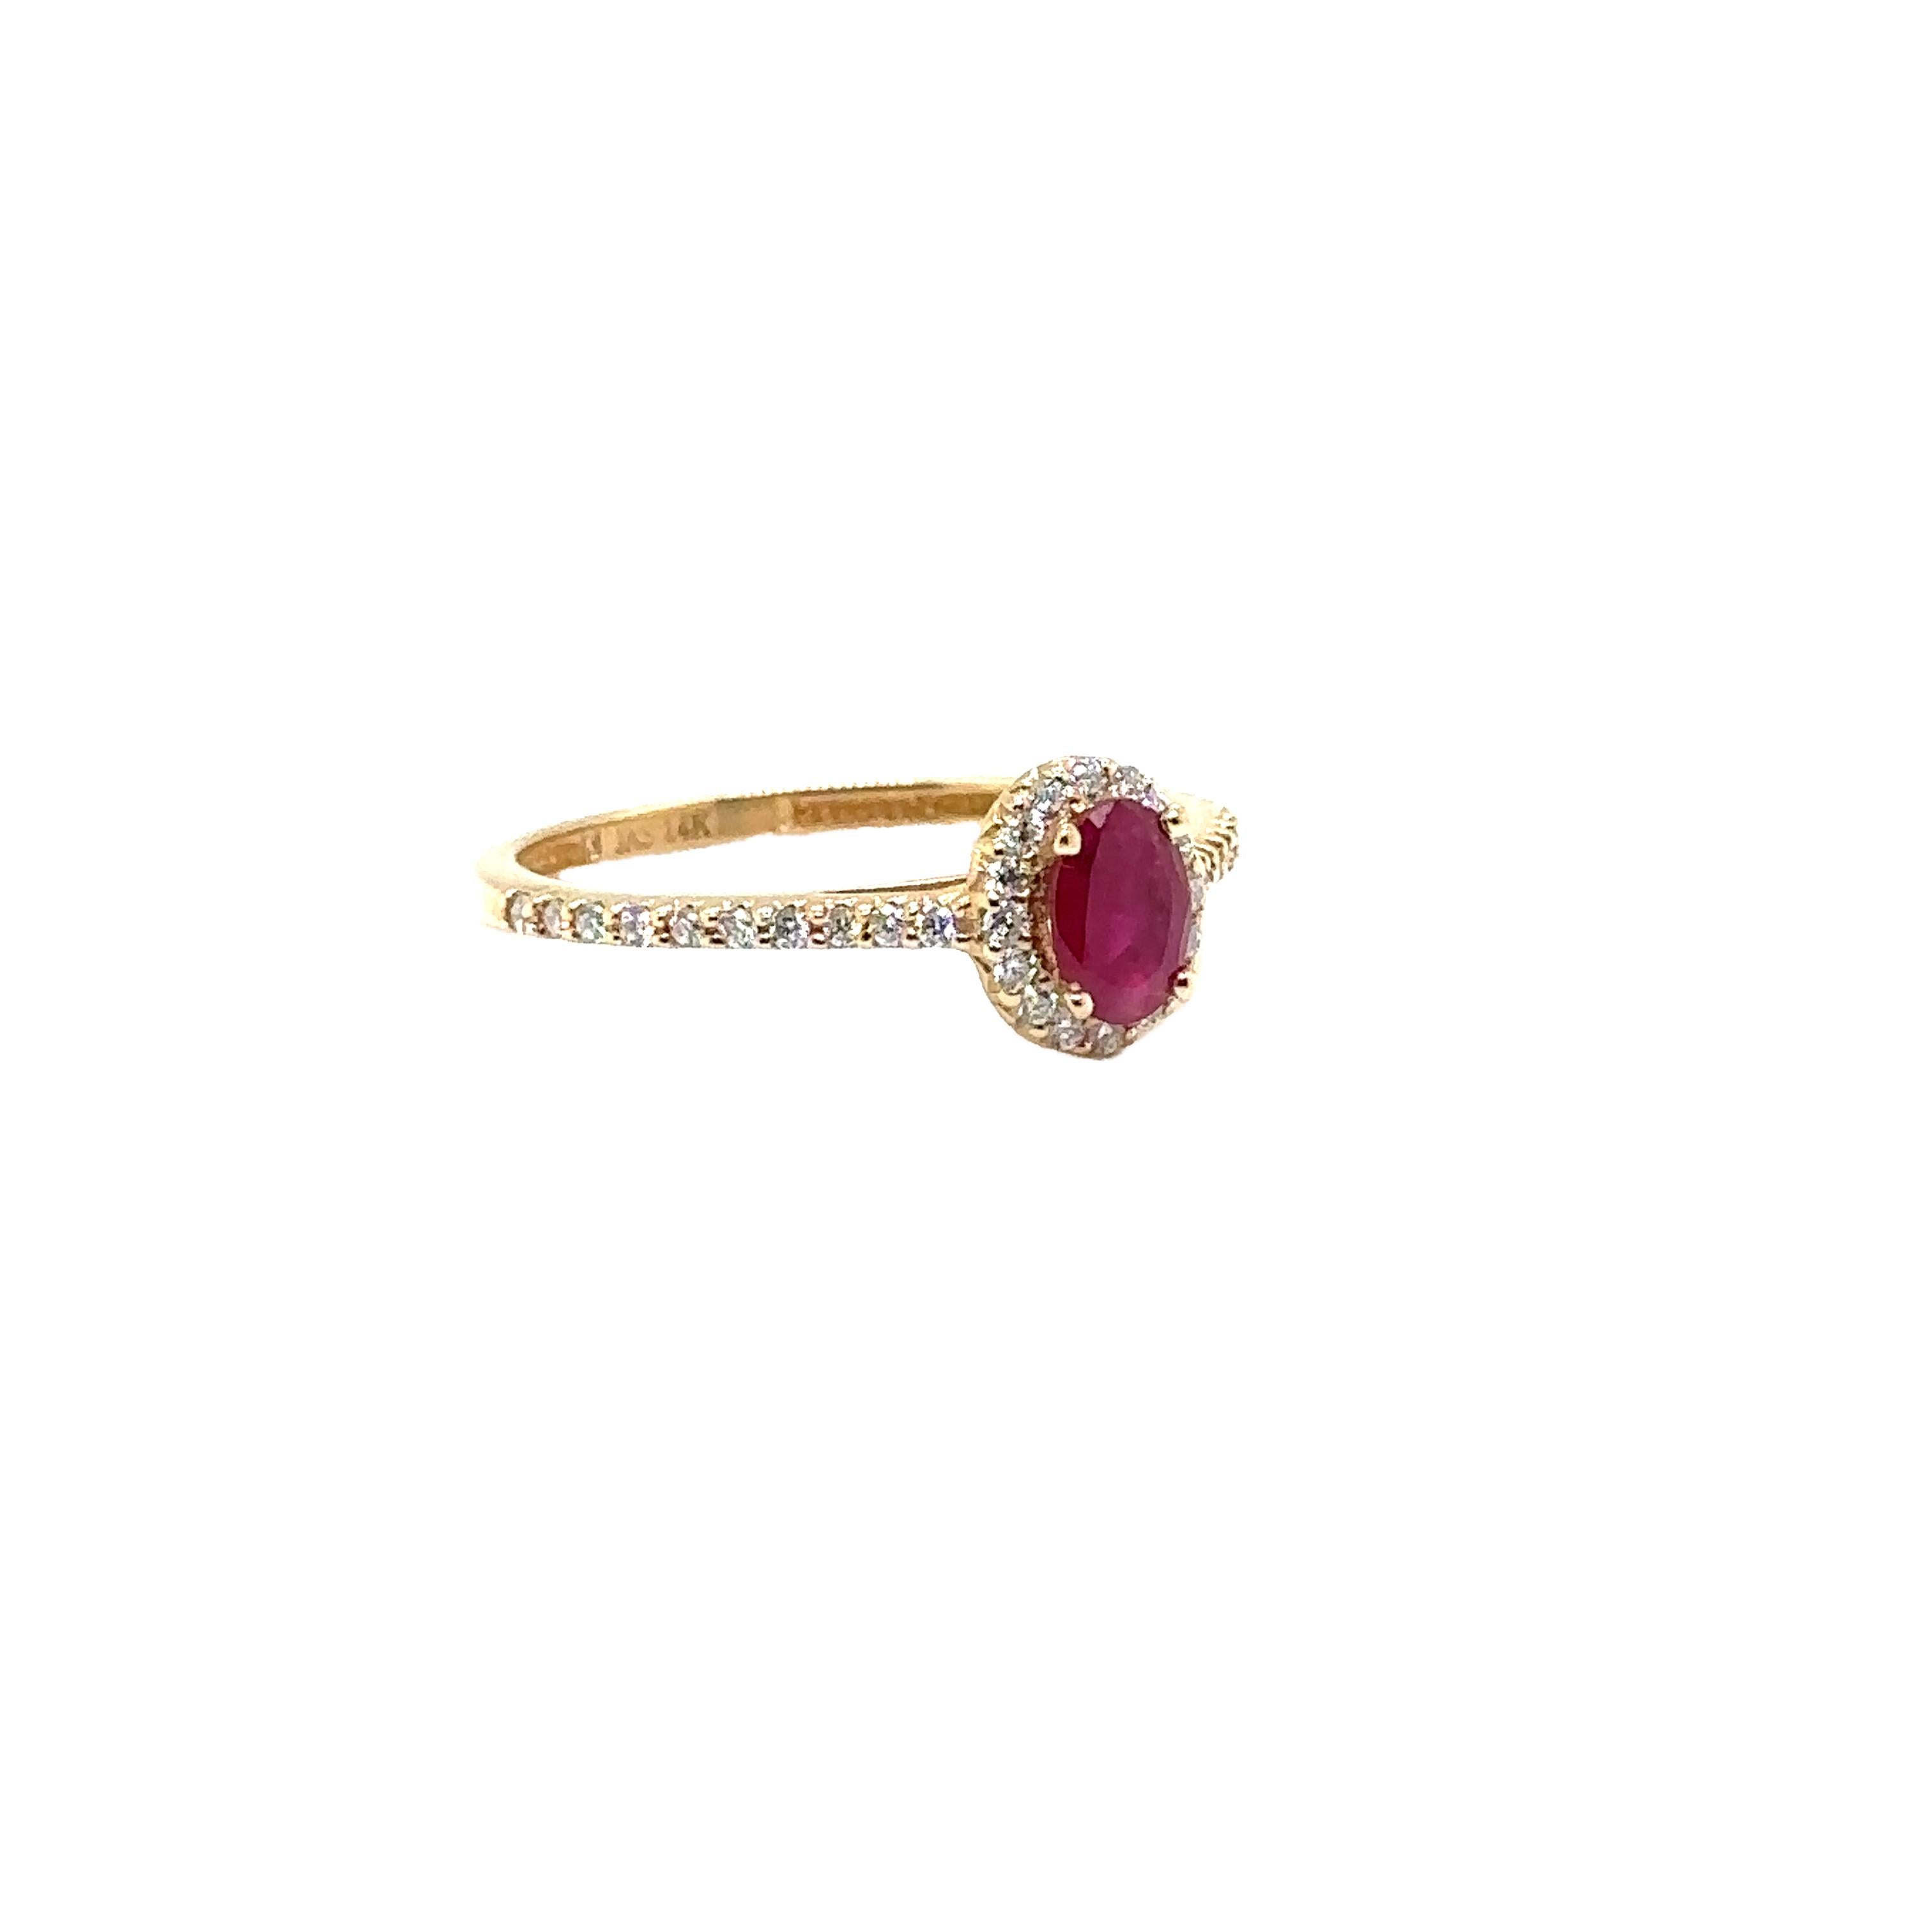 14K YELLOW GOLD OVAL RUBY RING with DIAMONDS
Metal: 14K YELLOW GOLD
Diamond Info: GH SI DIAMONDS 0.20CT
Stone Info: 6X4 OVAL RUBY 0.52CT
Total Dia Weight: 0.20 cwt.
Total Stone Weight: 0.52 cwt.
Item Weight: 2.22 gm
Ring Size: 8